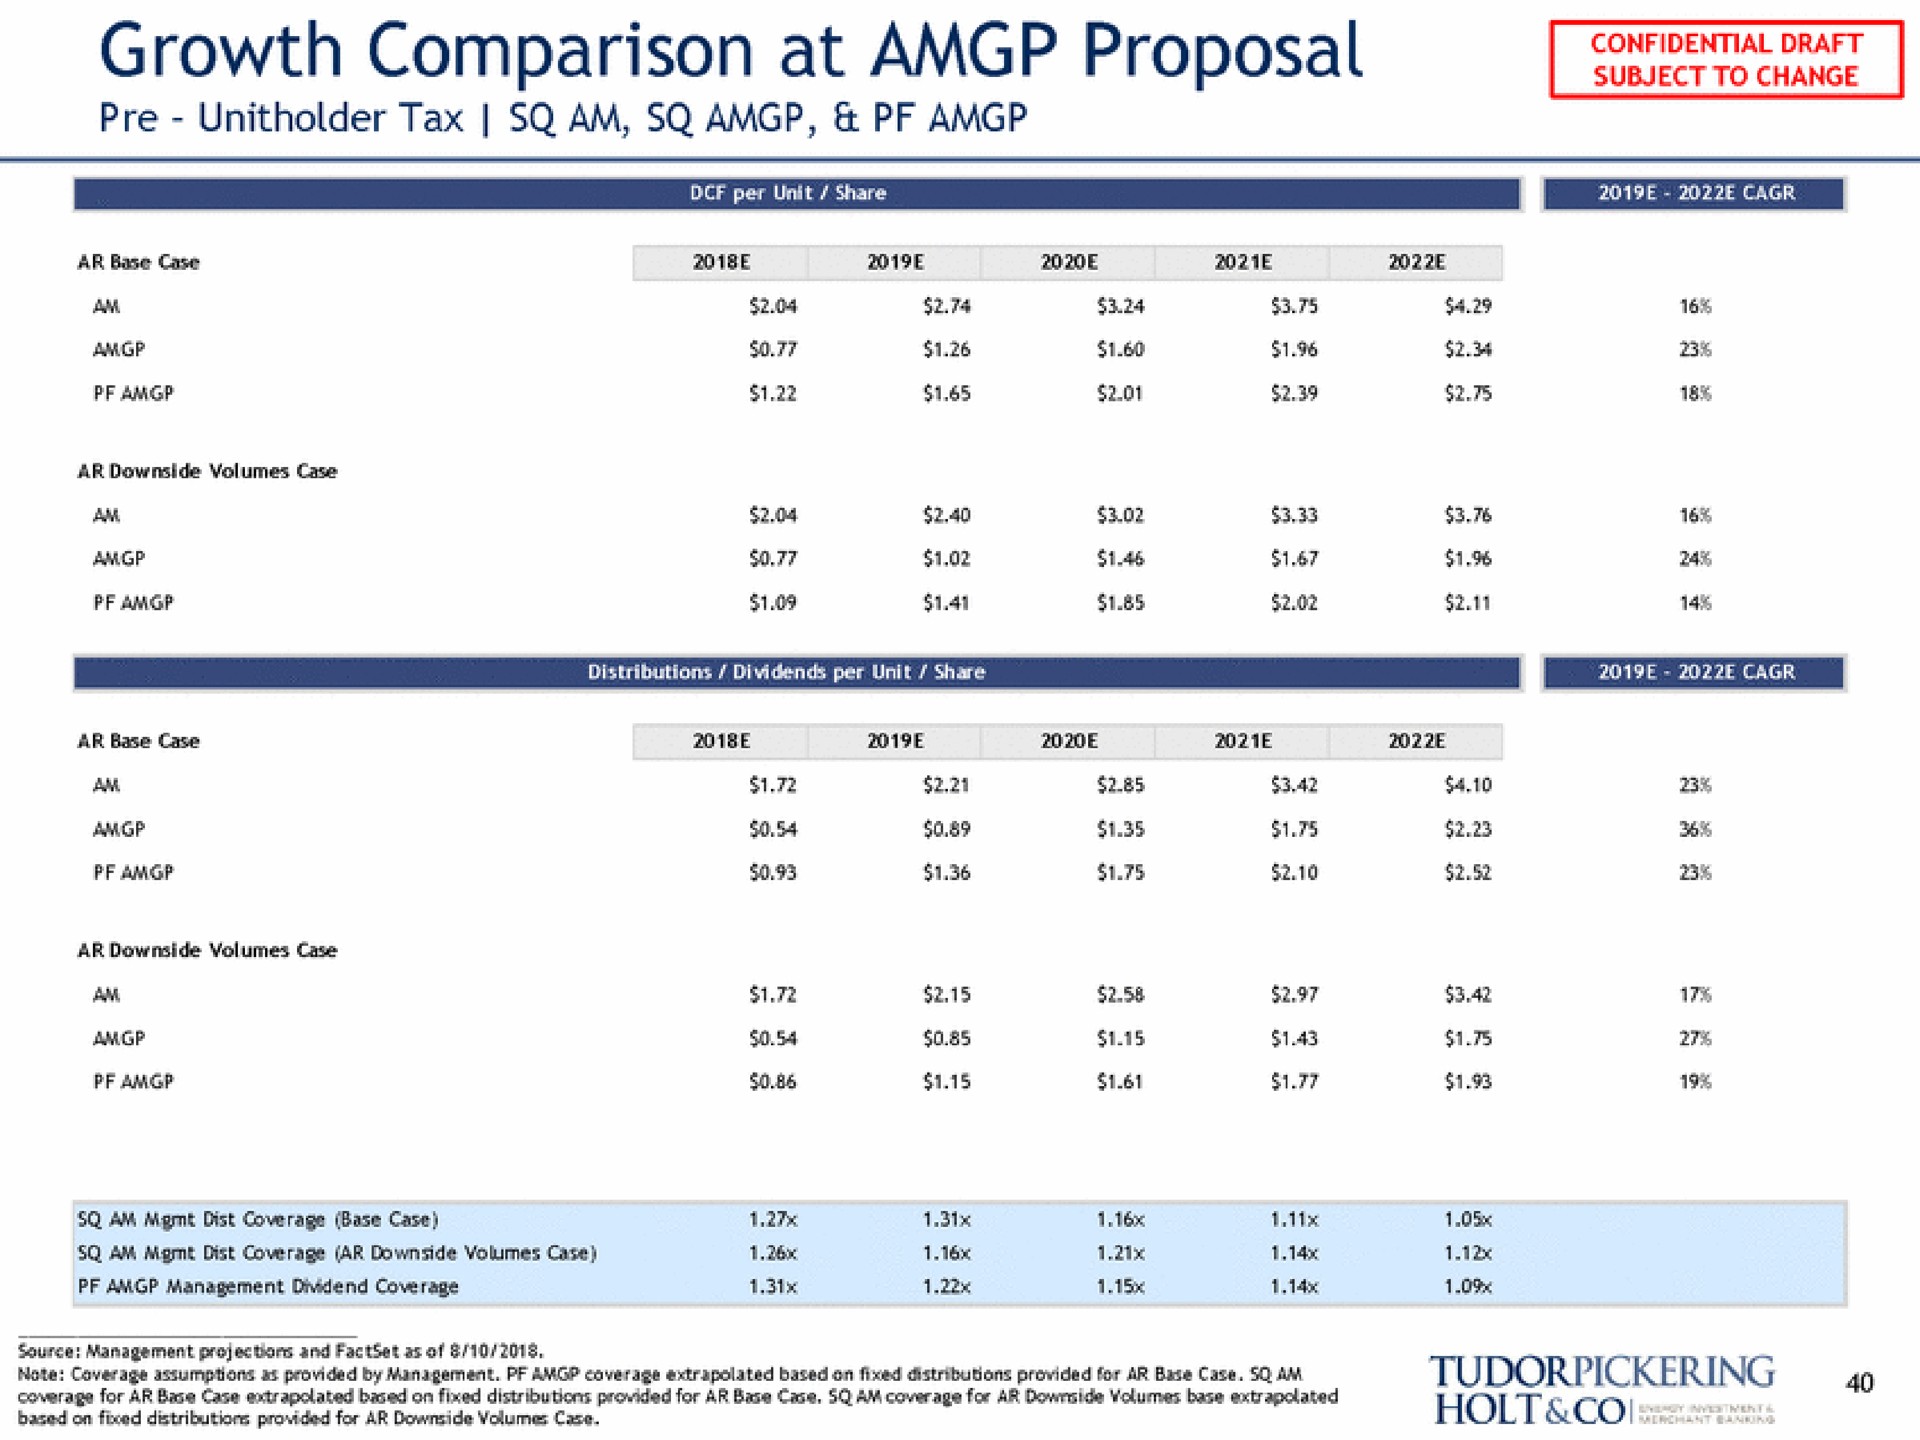 growth comparison at proposal tax am | Tudor, Pickering, Holt & Co